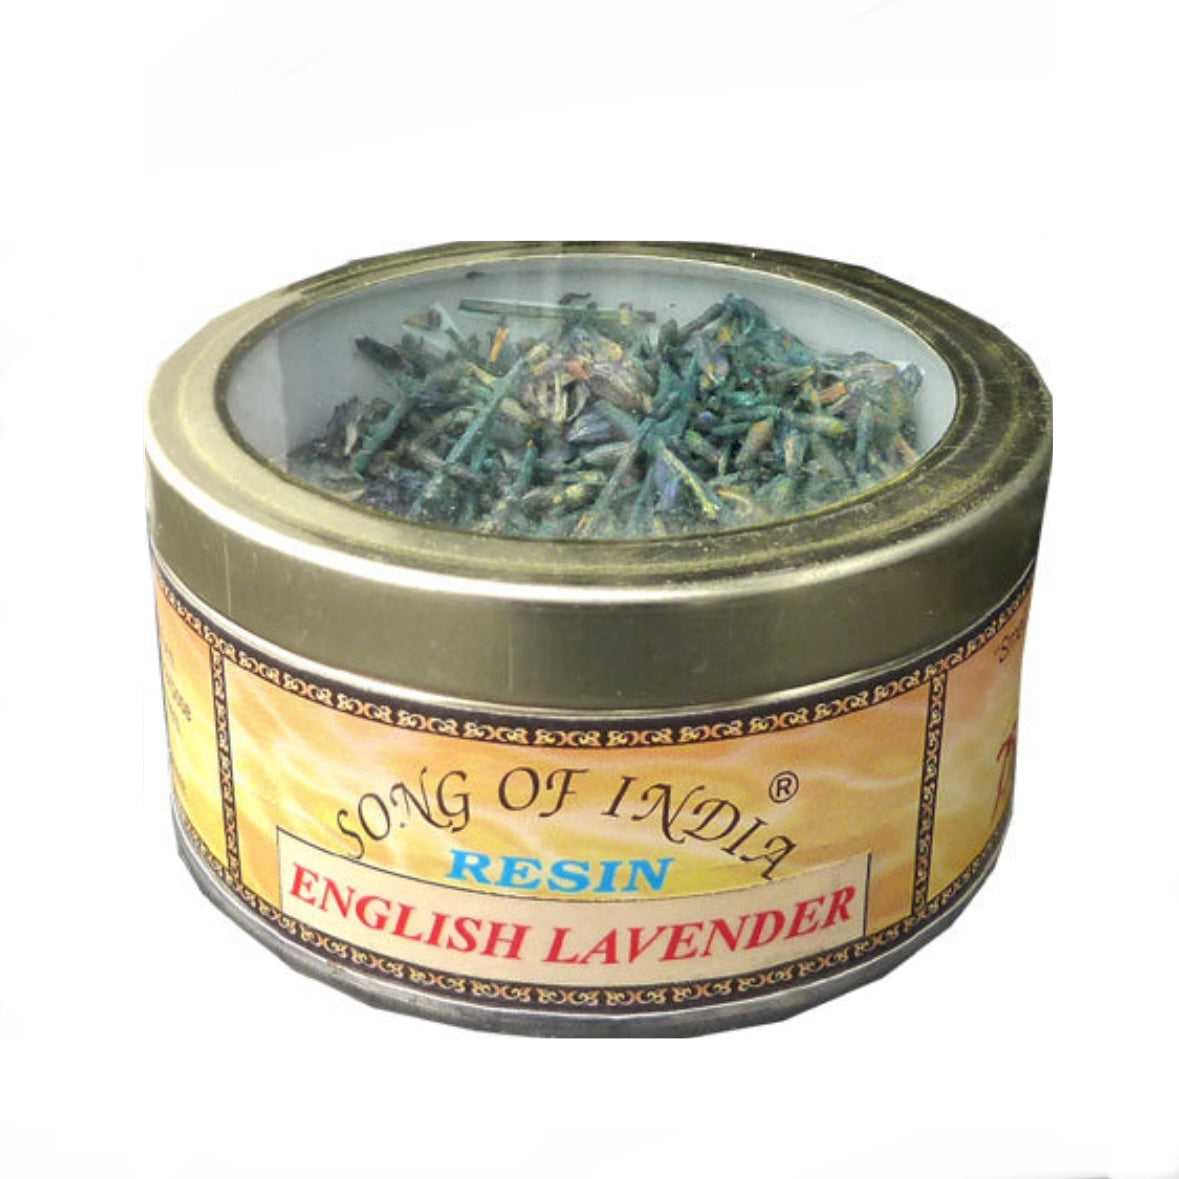 Song of India English Lavender Incenso in Resina 100% Naturale - 8g